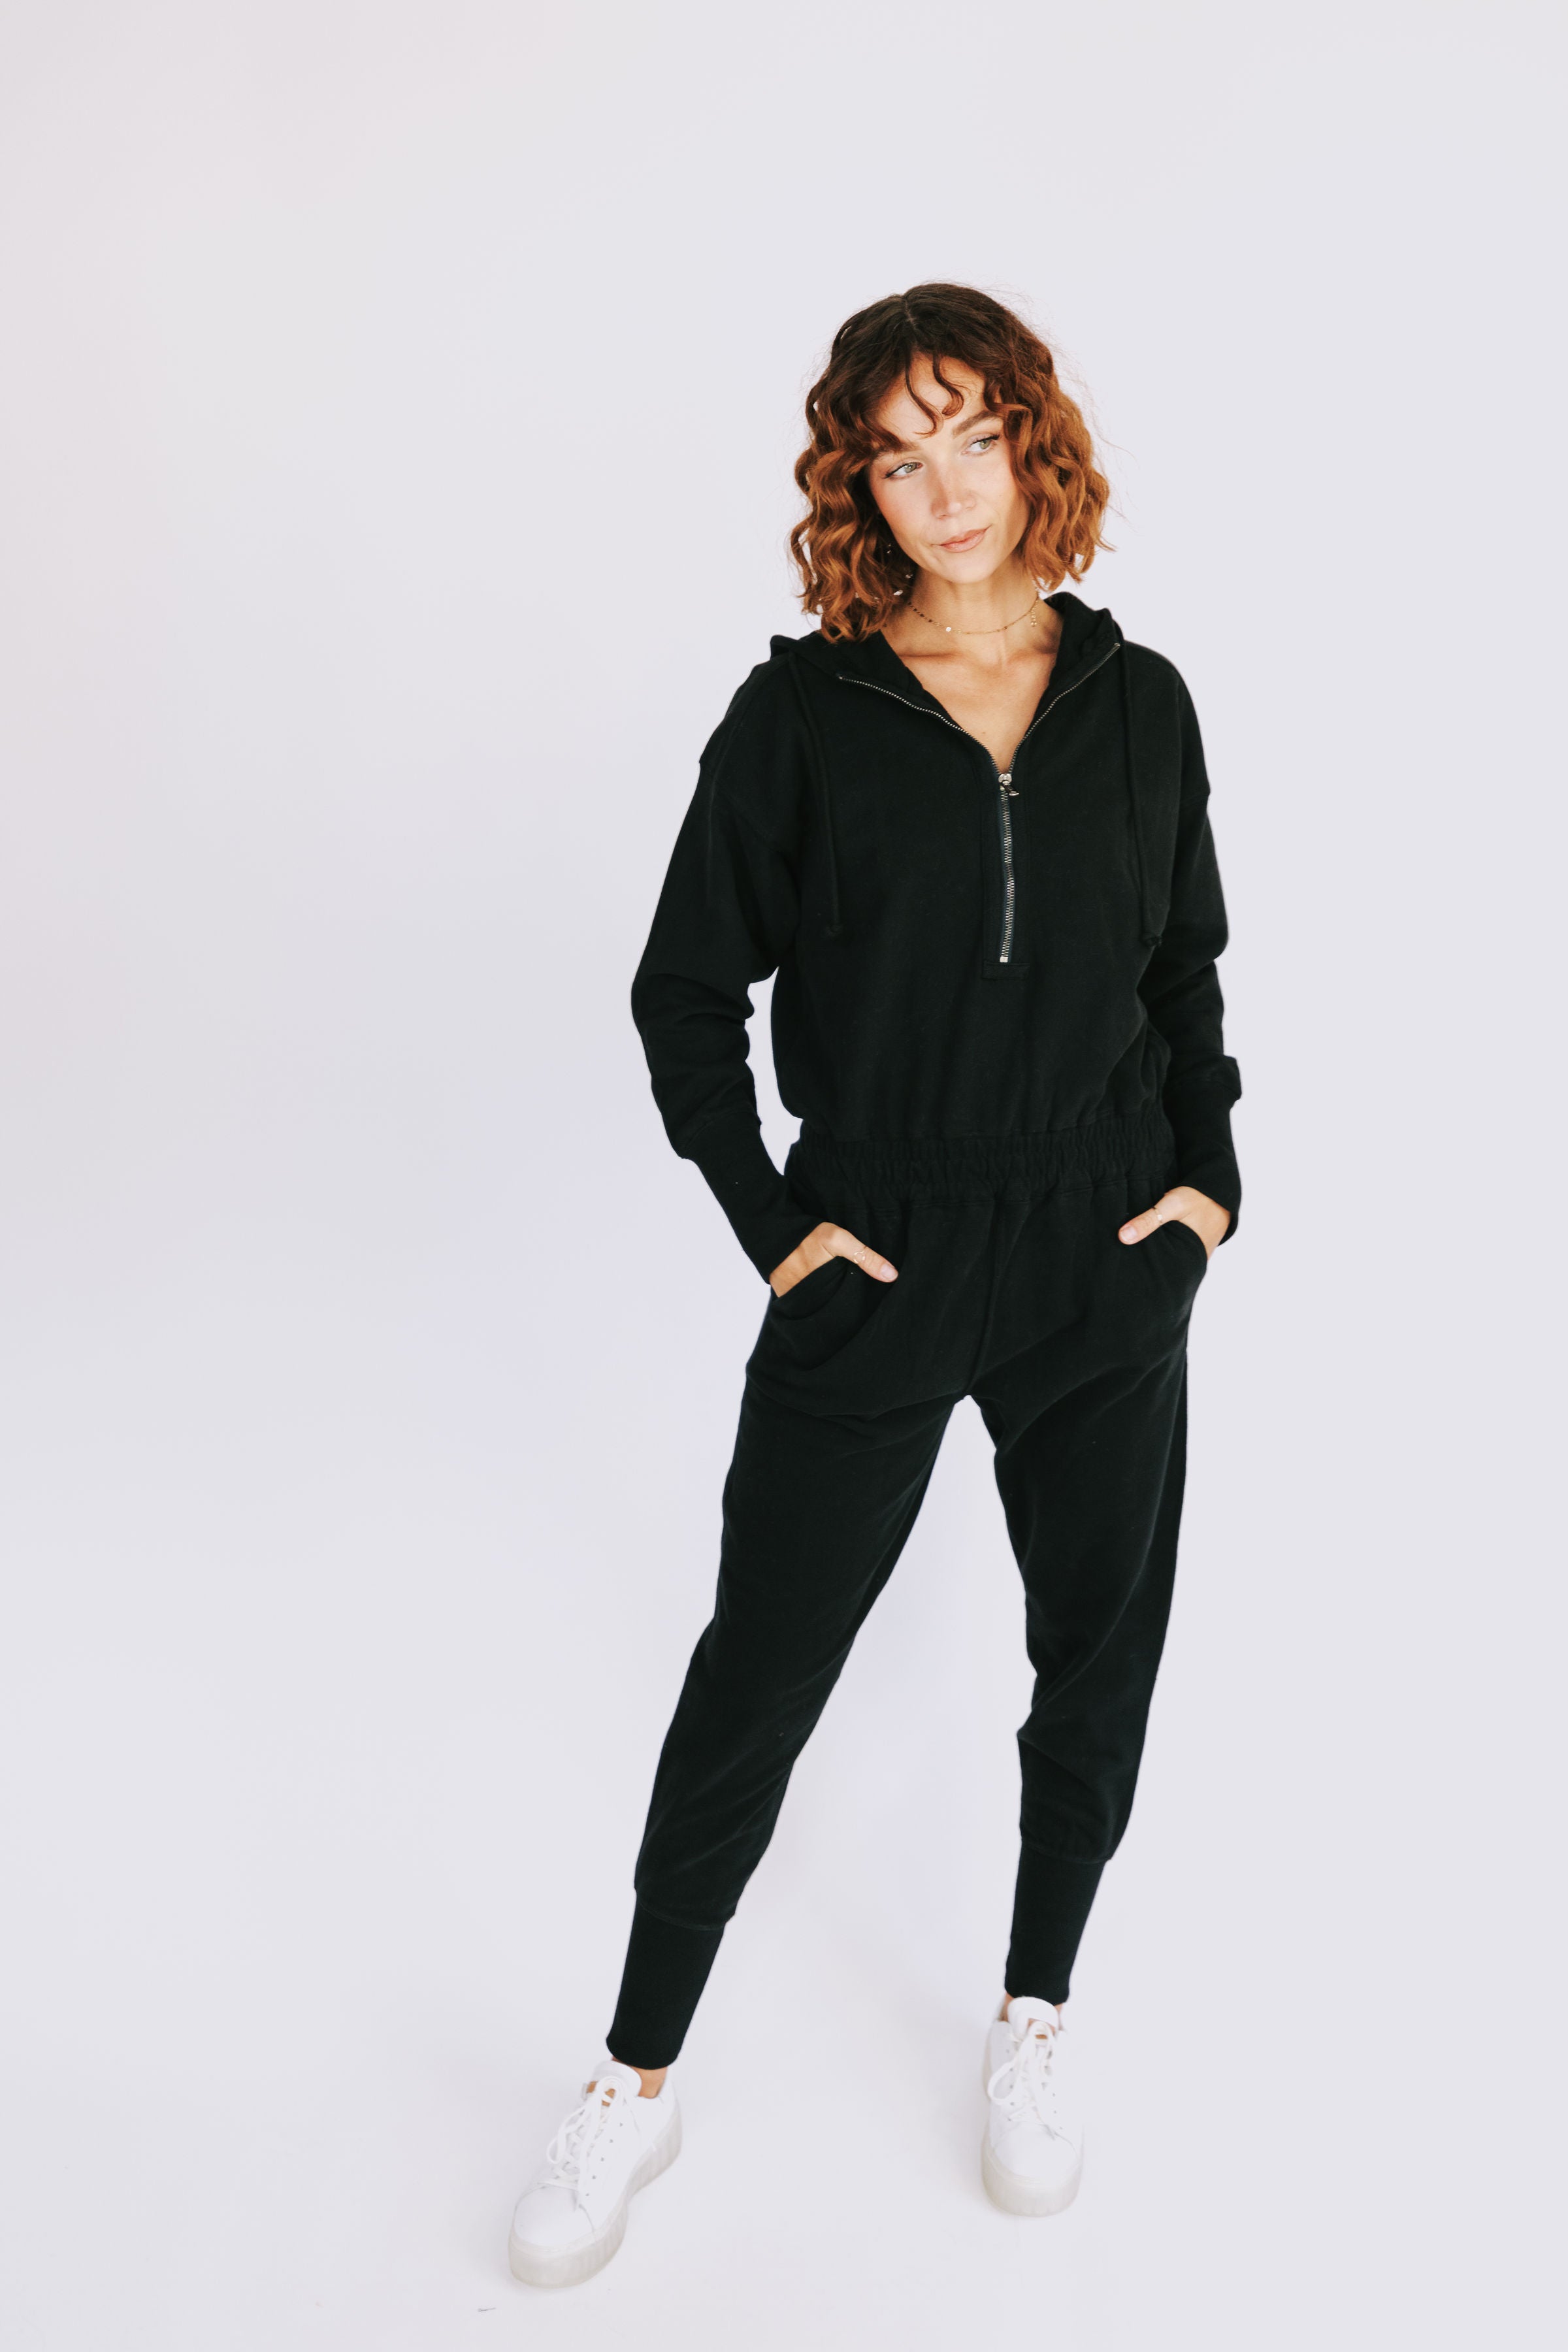 FREE PEOPLE - Training Day Jumpsuit